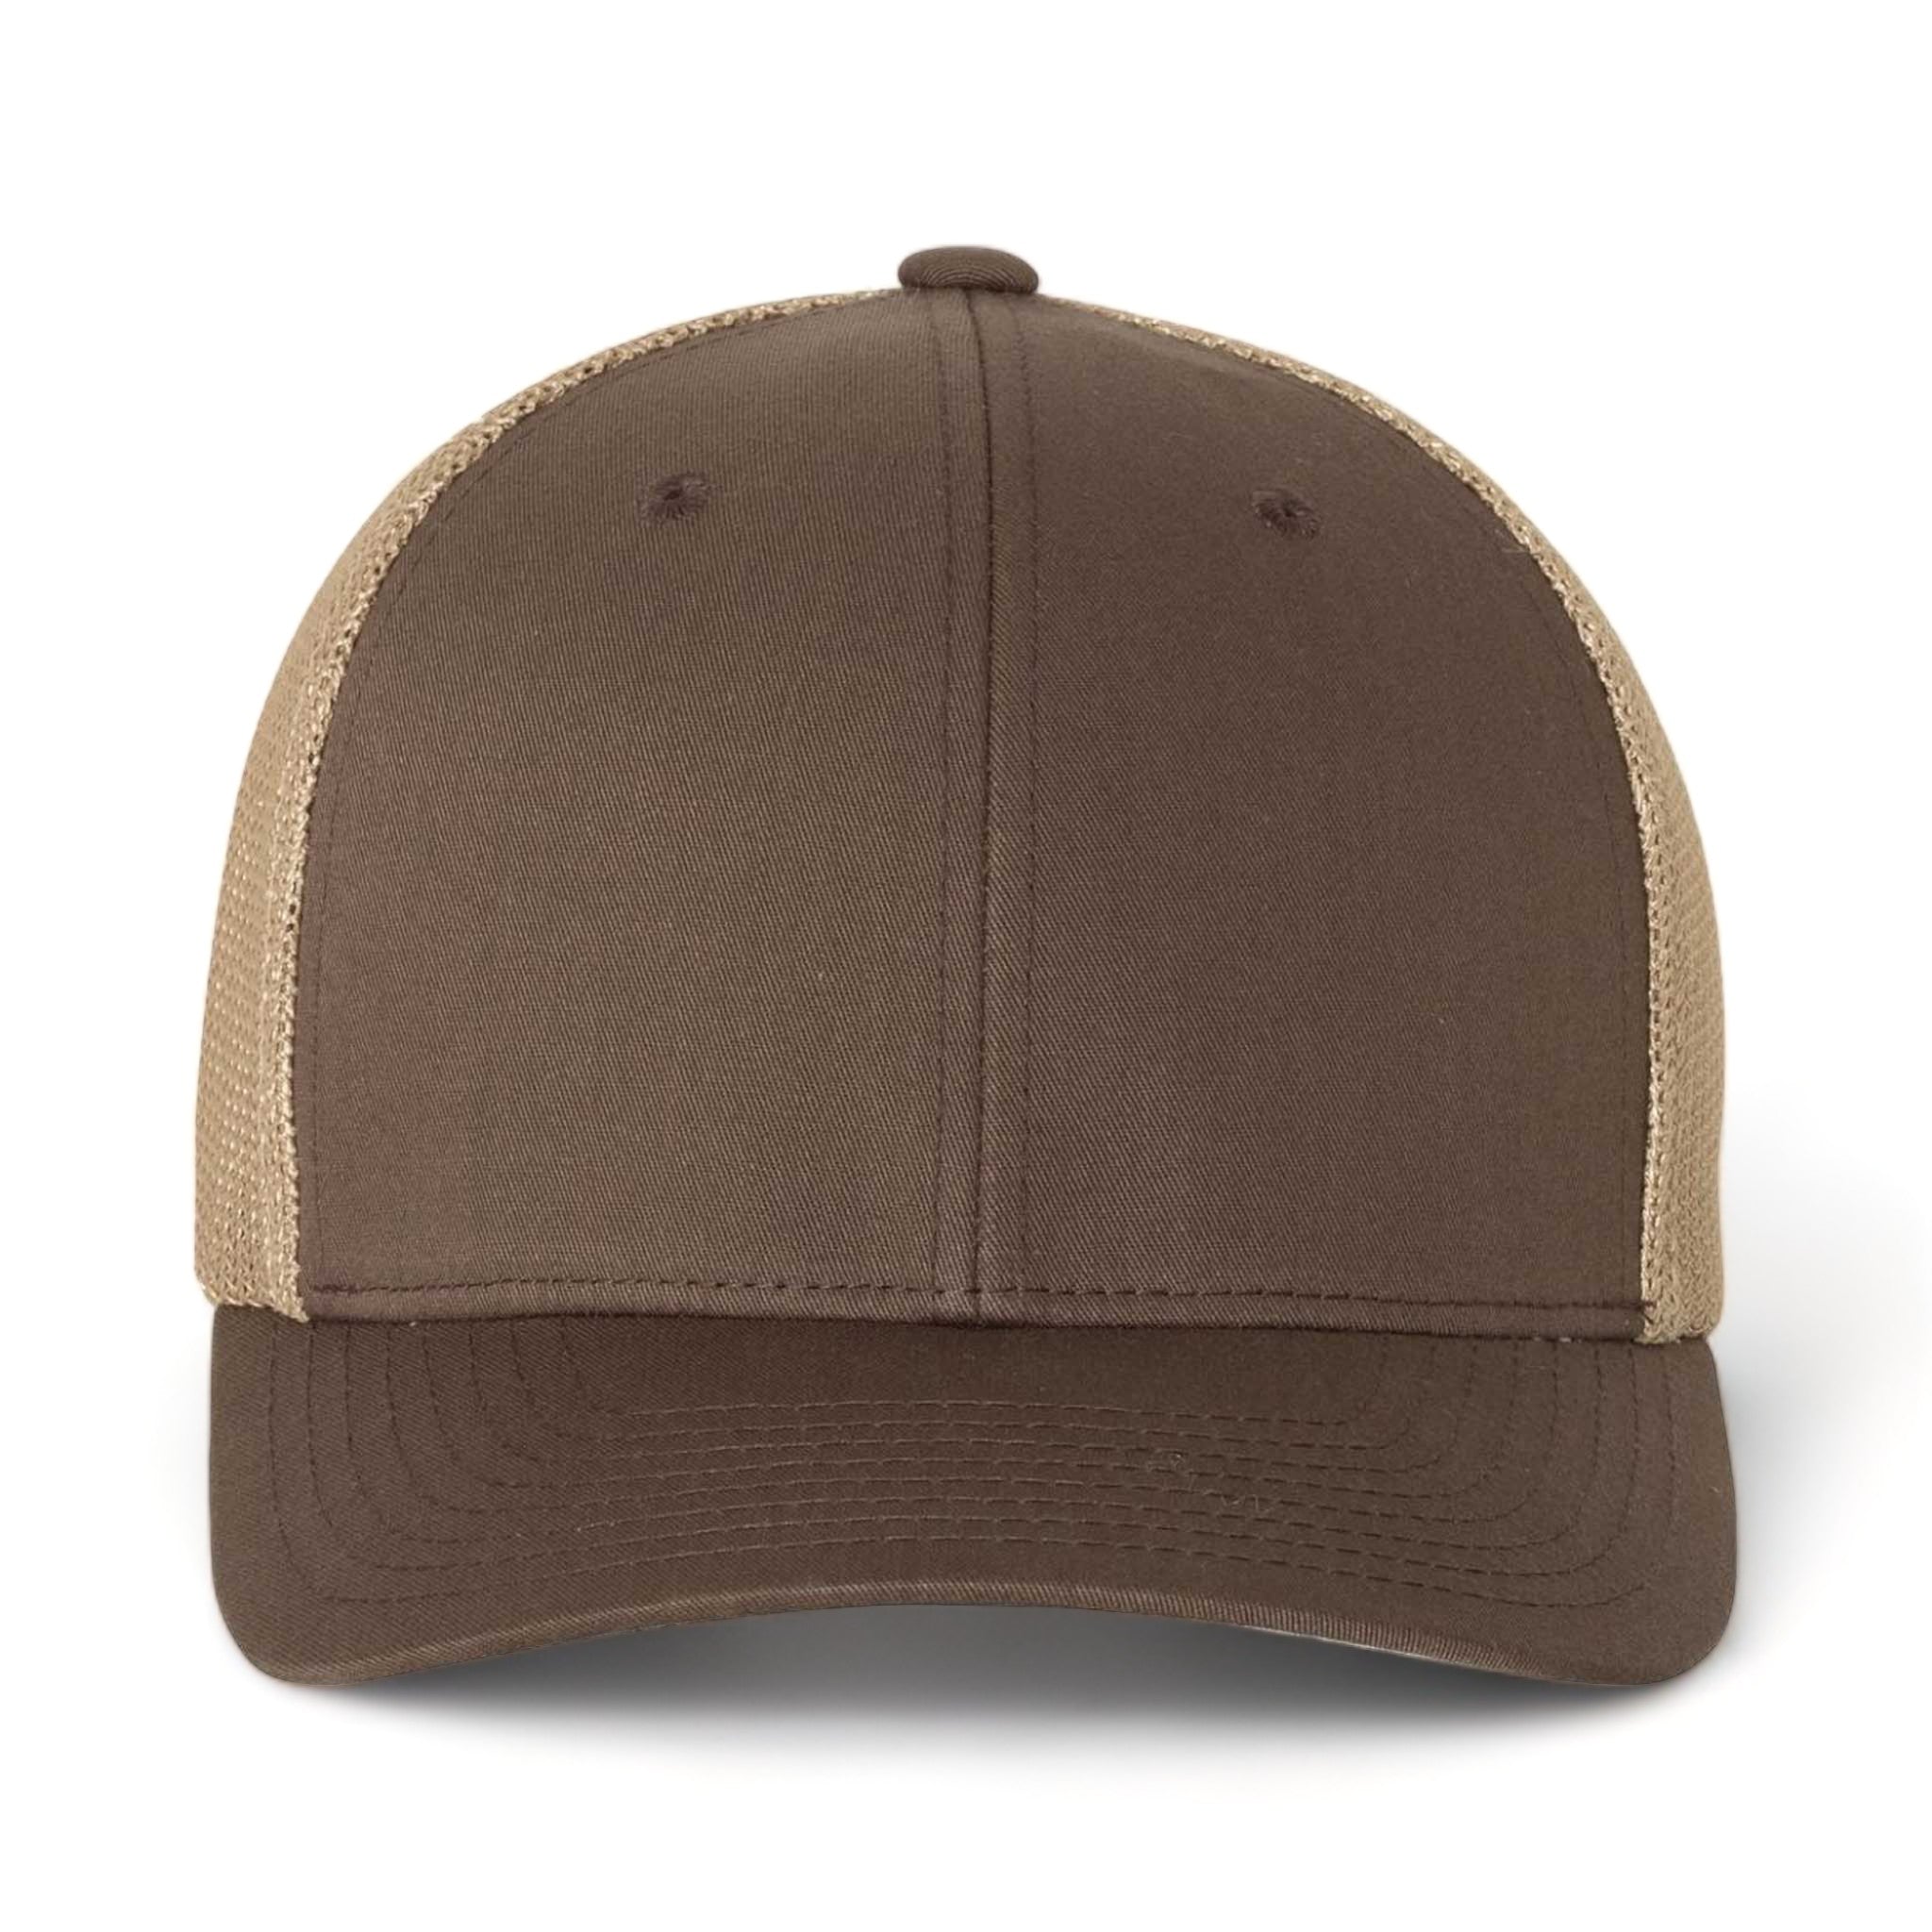 Front view of Flexfit 6511 custom hat in brown and khaki